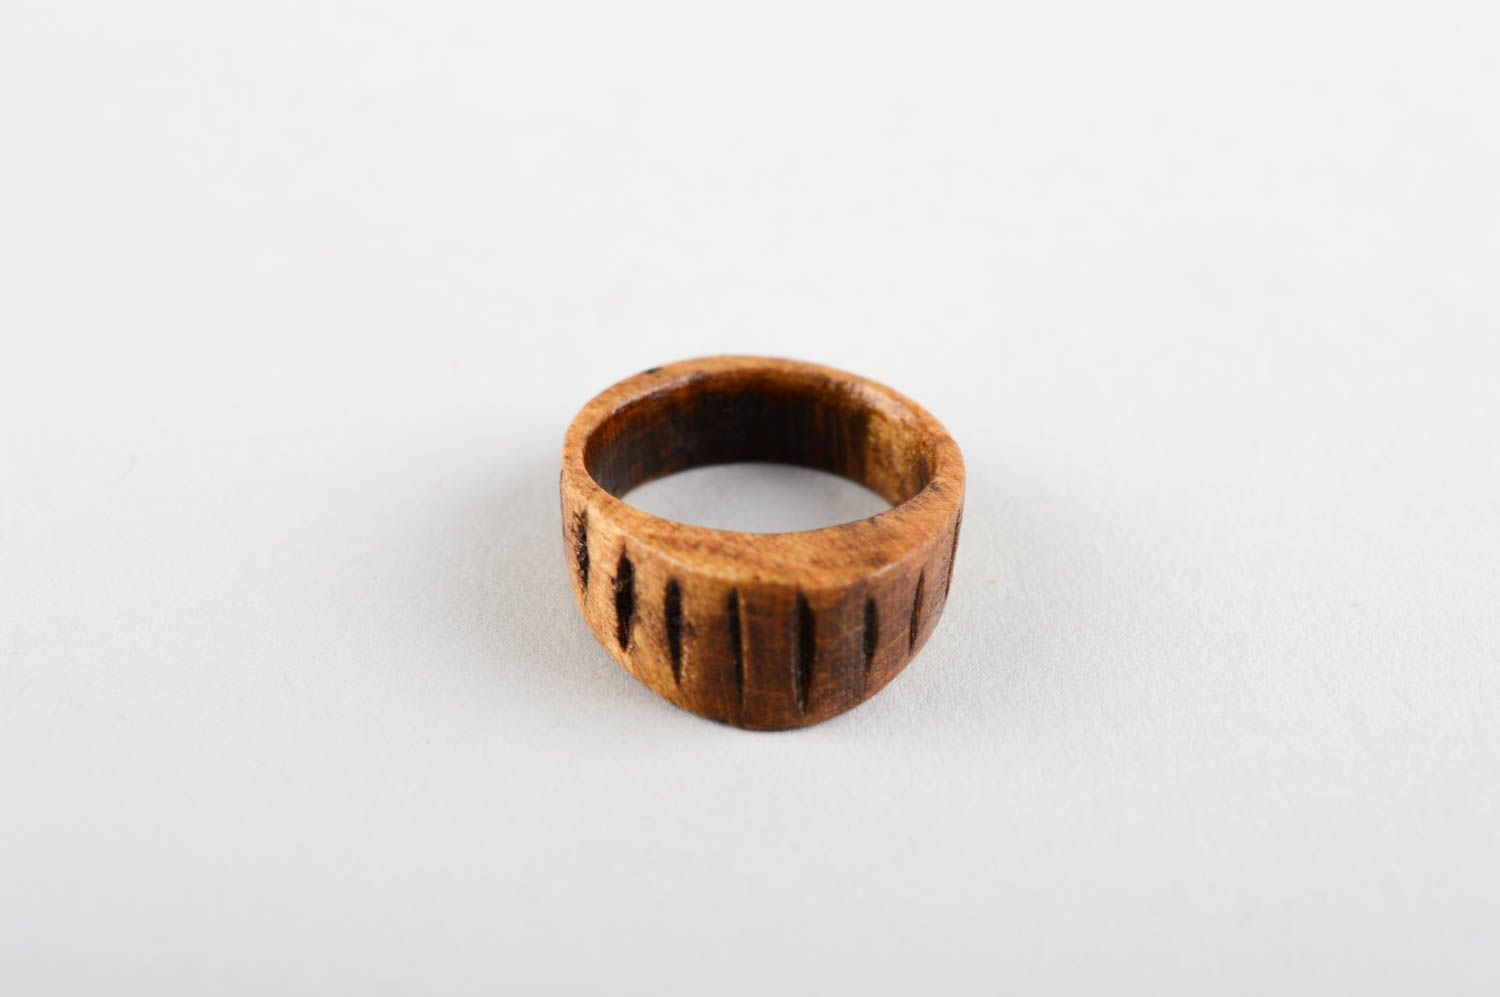 Unusual handmade wooden ring fashion accessories wood craft gifts for her photo 2